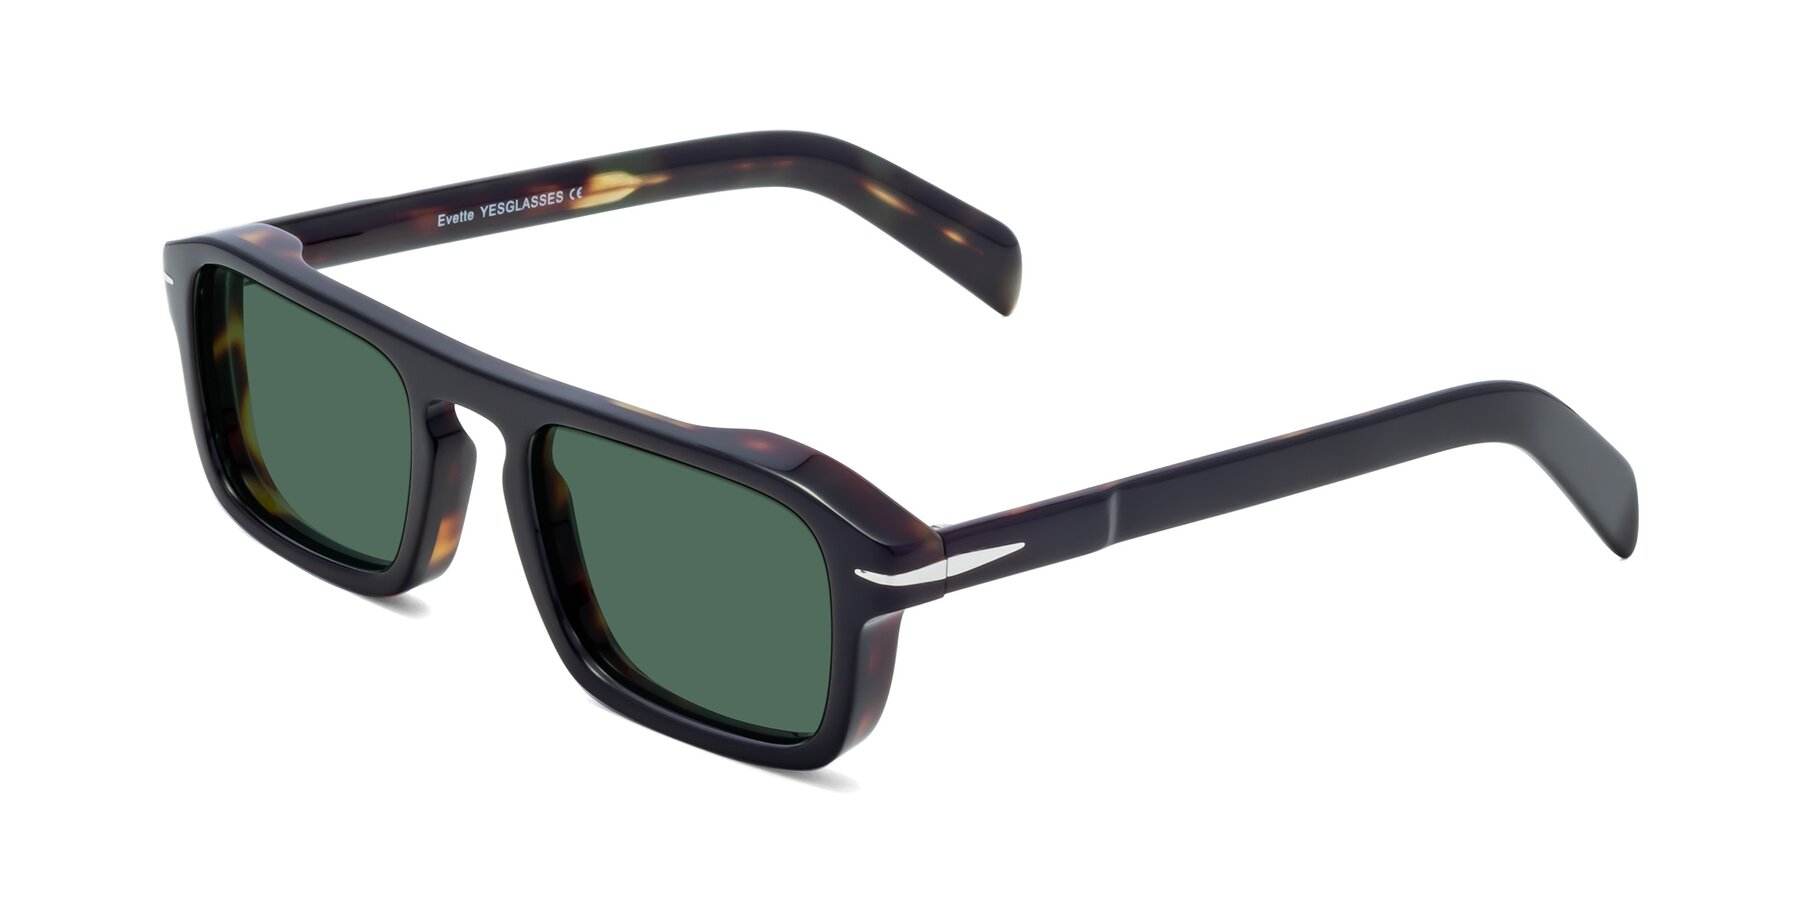 Angle of Evette in Black-Tortoise with Green Polarized Lenses